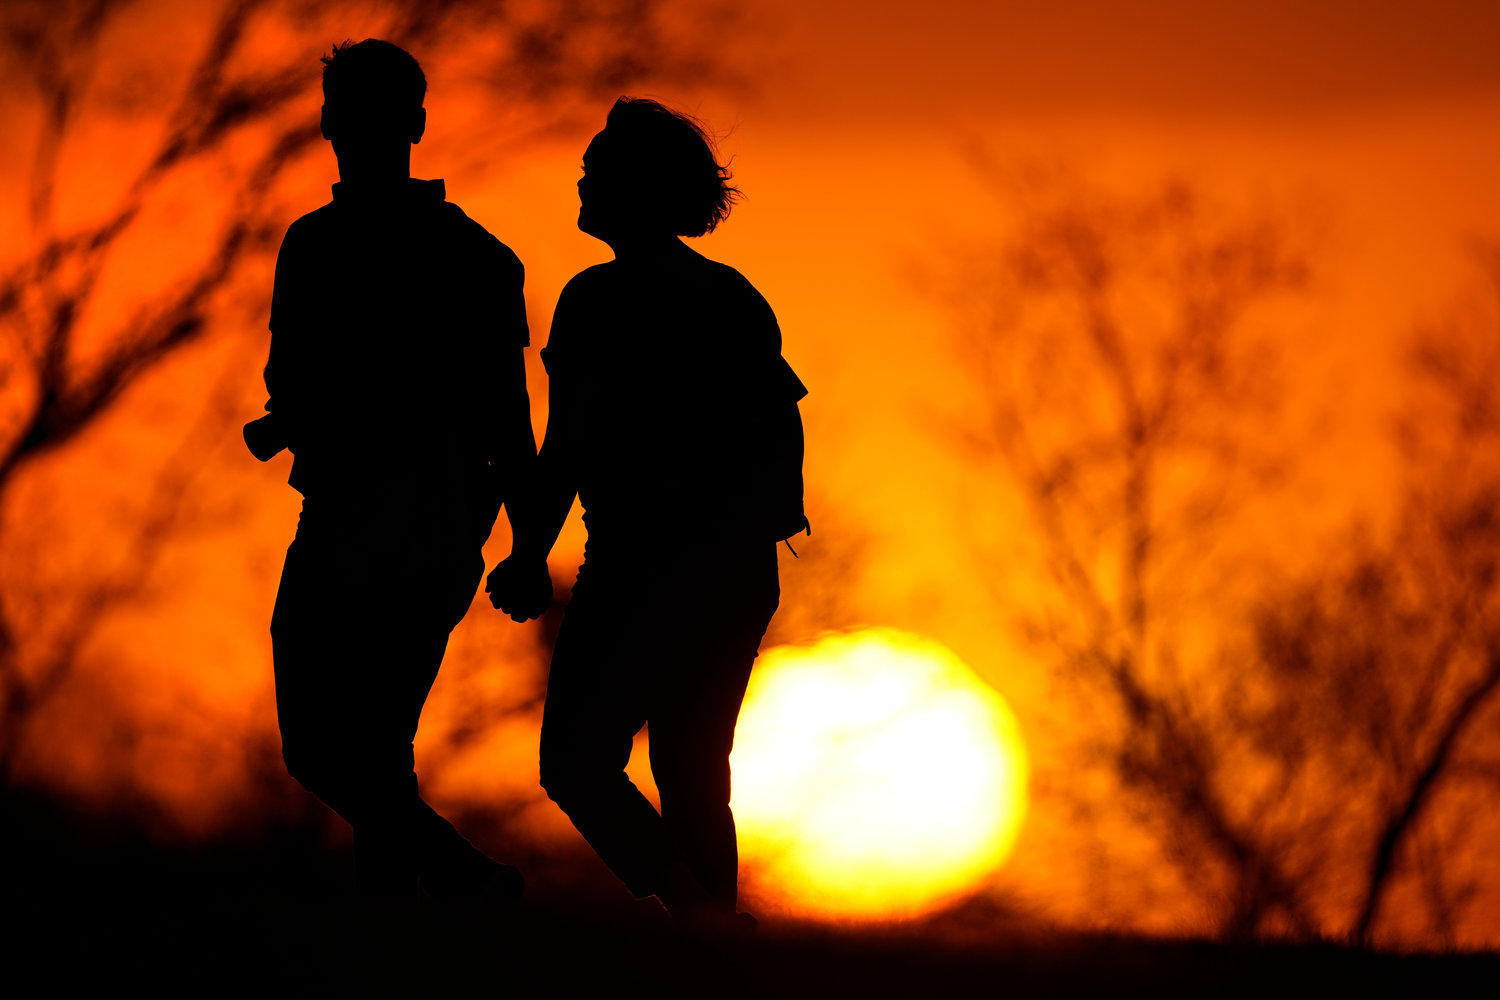 FILE - In this March 10, 2021 file photo, a couple walks through a park at sunset in Kansas City, Mo. U.S. life expectancy dropped for two consecutive years in 2020 and 2021, marking the first such trend since the early 1920s, according to a new government report. (AP Photo/Charlie Riedel, File)